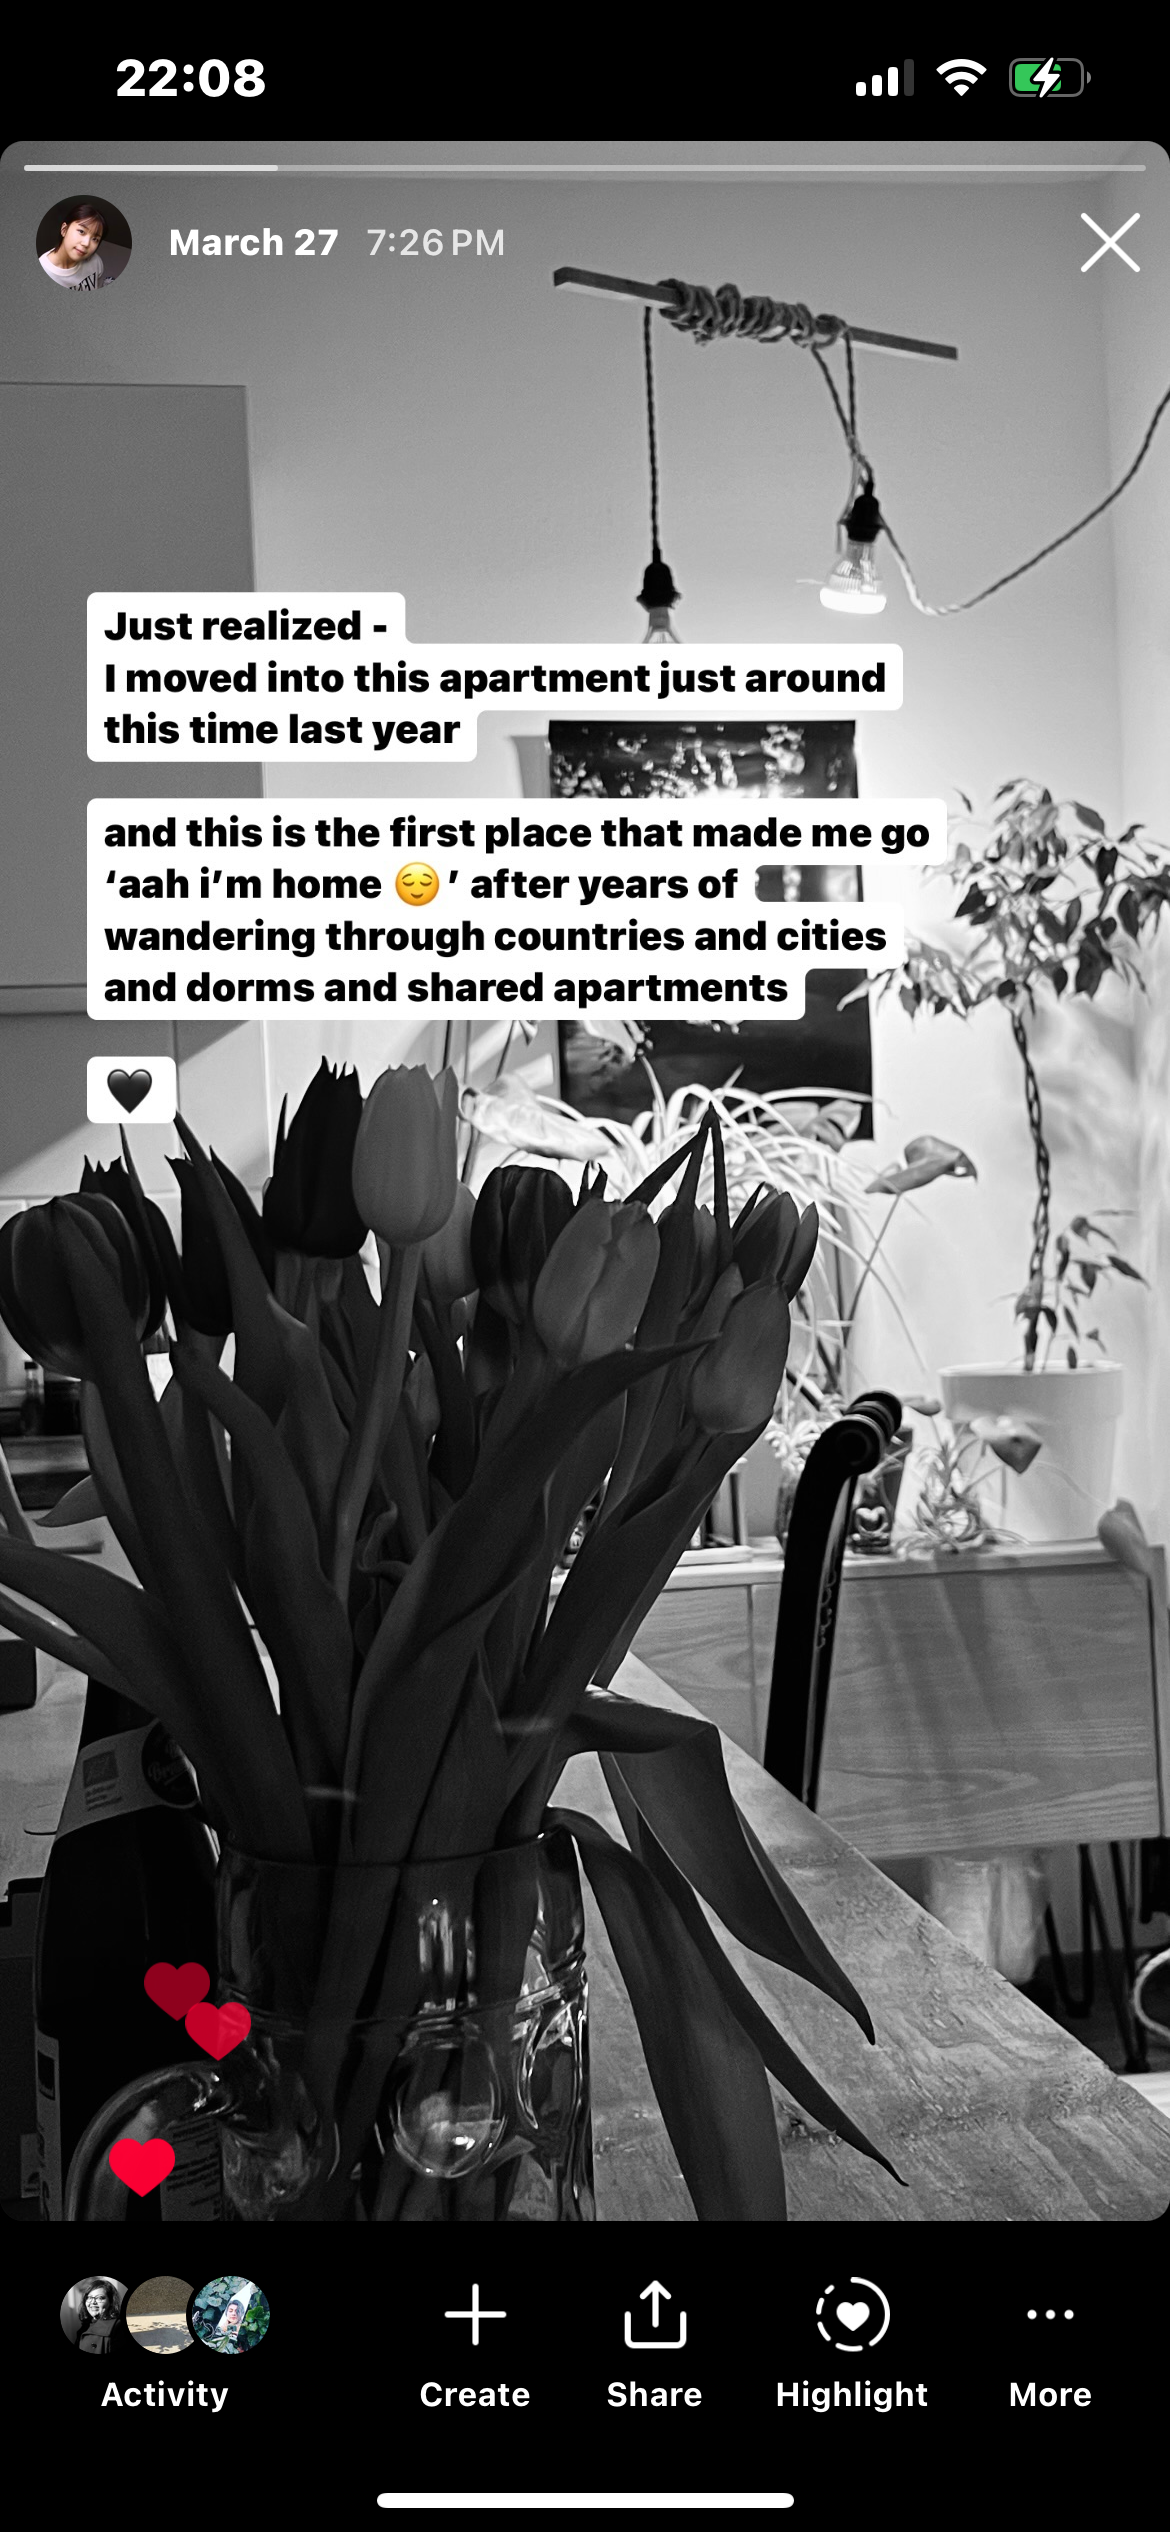 Insta post about my home with text: "Just realized - I moved into this apartment just around this time last year. and this is the first place that made me go ‘aah i’m home 😌’ after years of wandering through countries and cities and dorms and shared apartments"